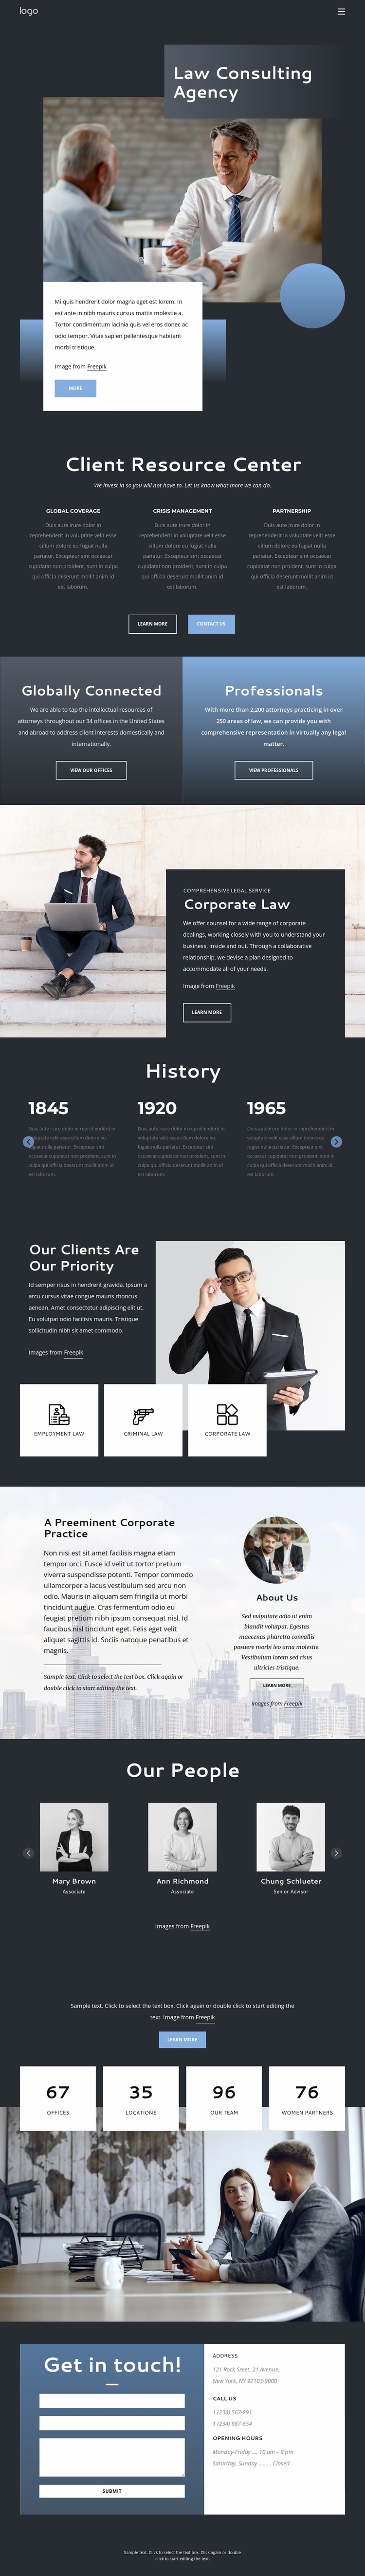 Law consulting agency eCommerce Template